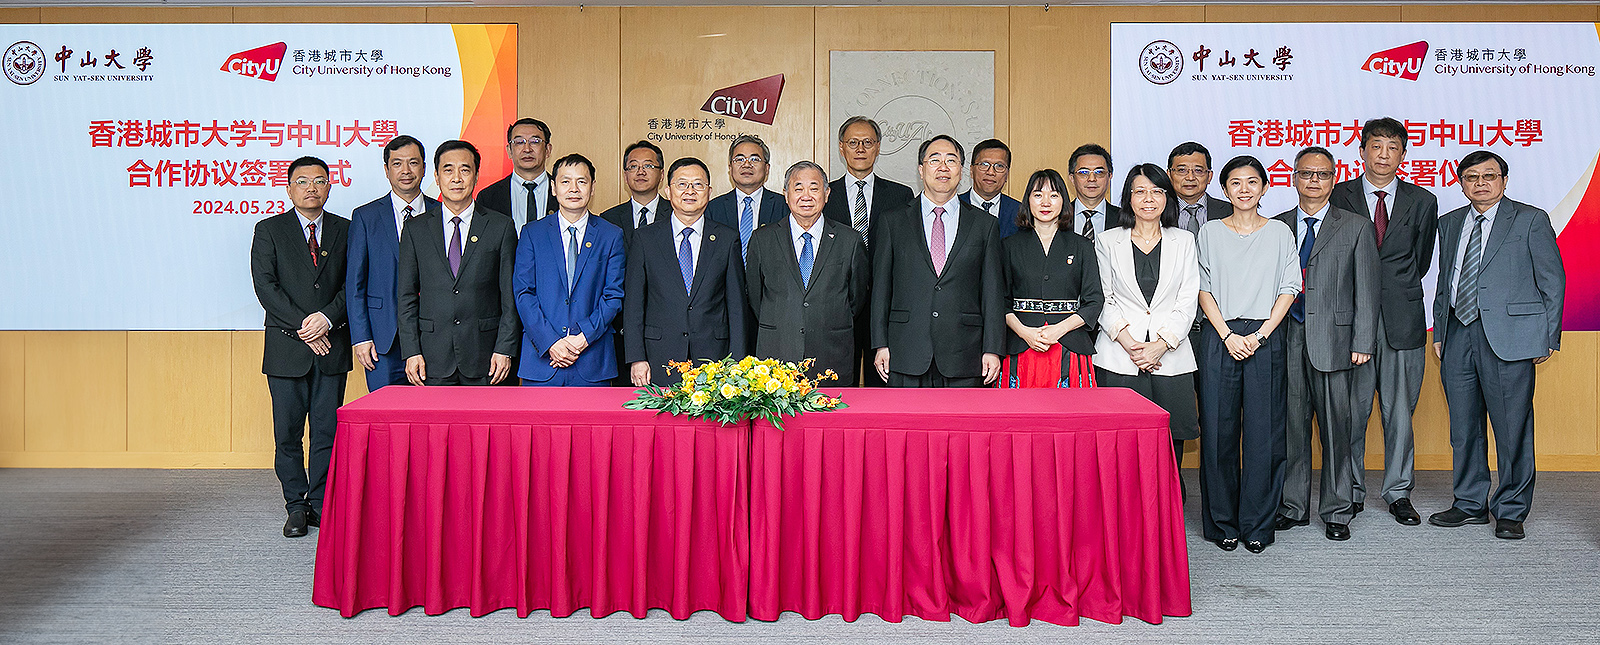 President Boey (front row, fourth left), President Gao (front row, third left), the SYSU delegation and the CityUHK representatives attend the signing ceremony.